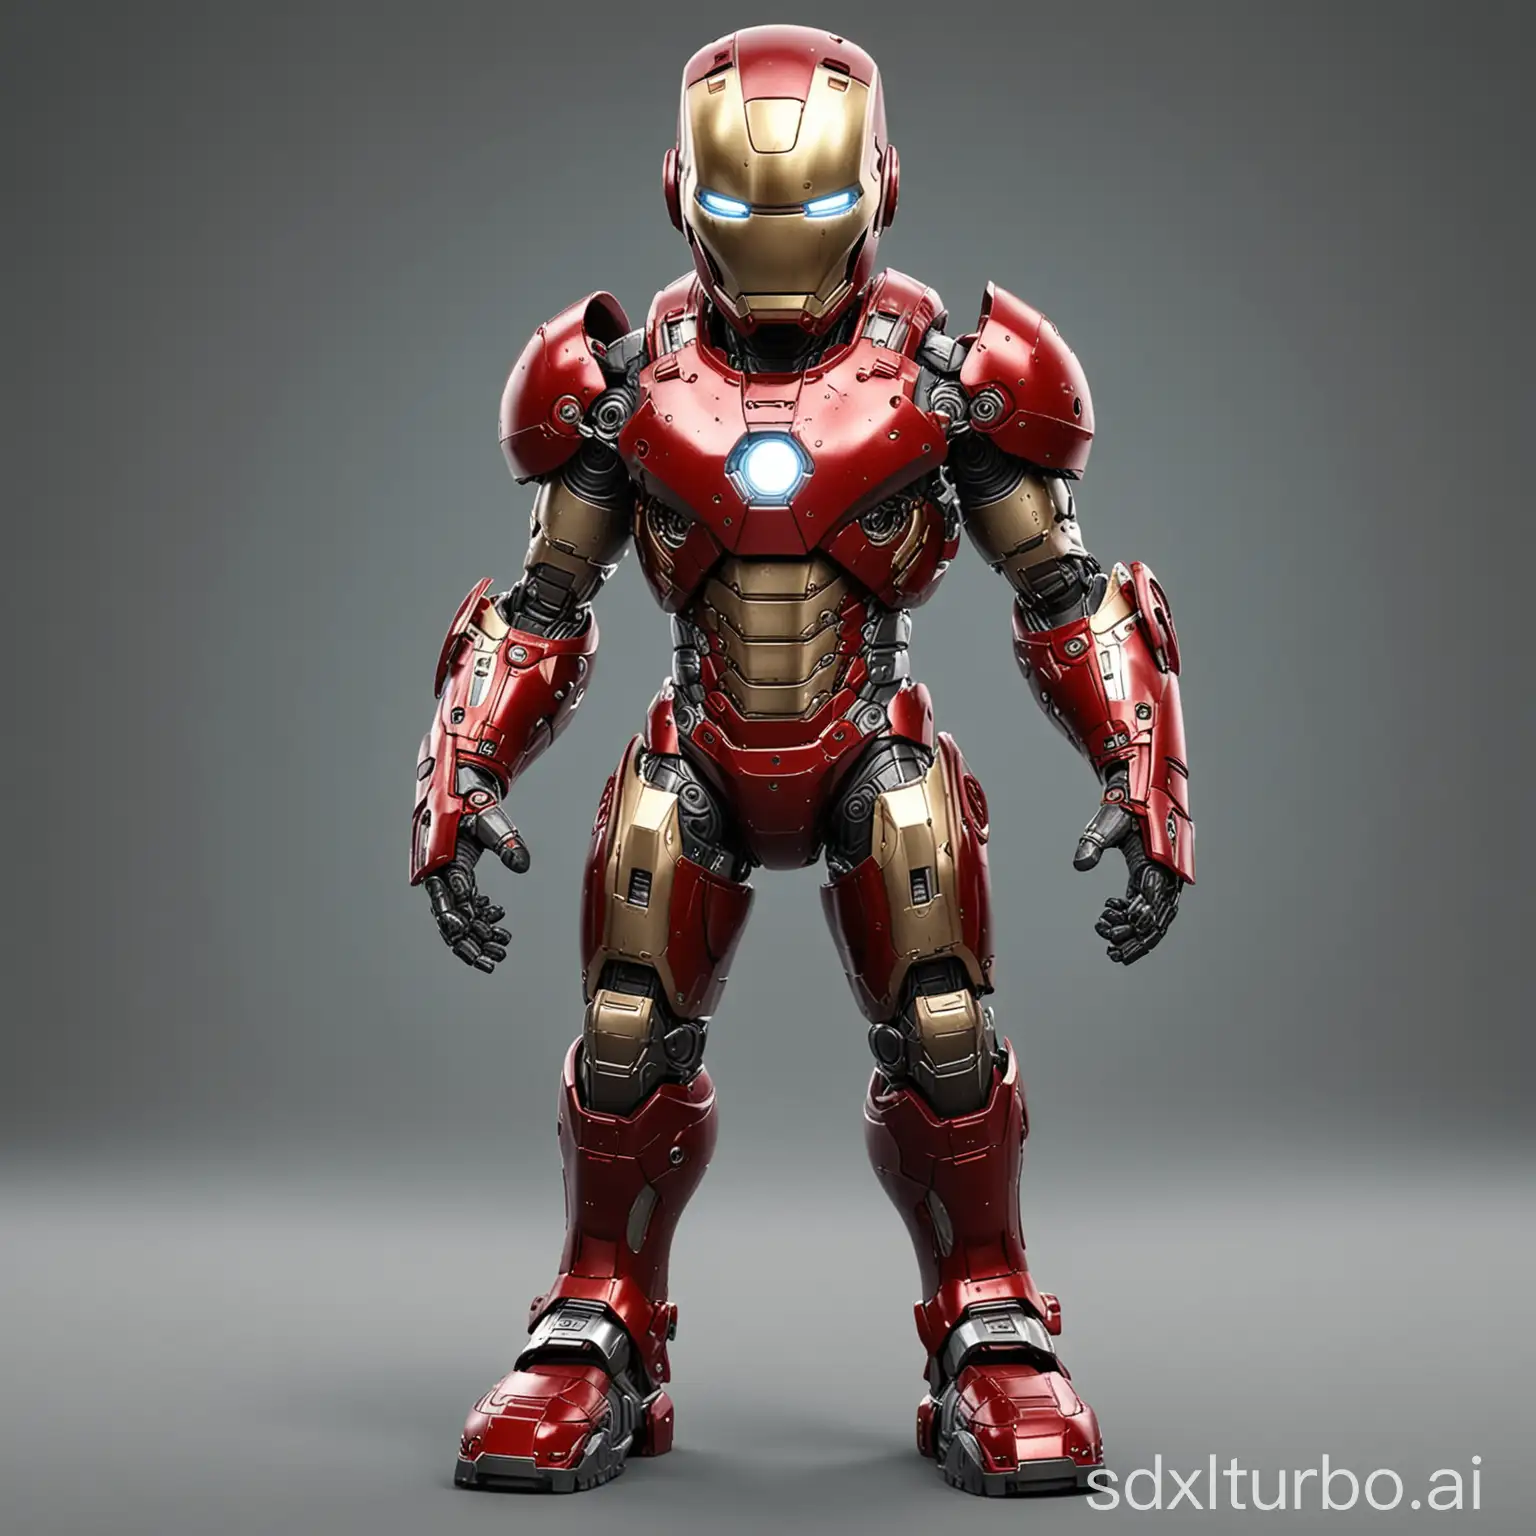 Young-Cyborg-Ironman-Stands-Tall-in-Full-Armor